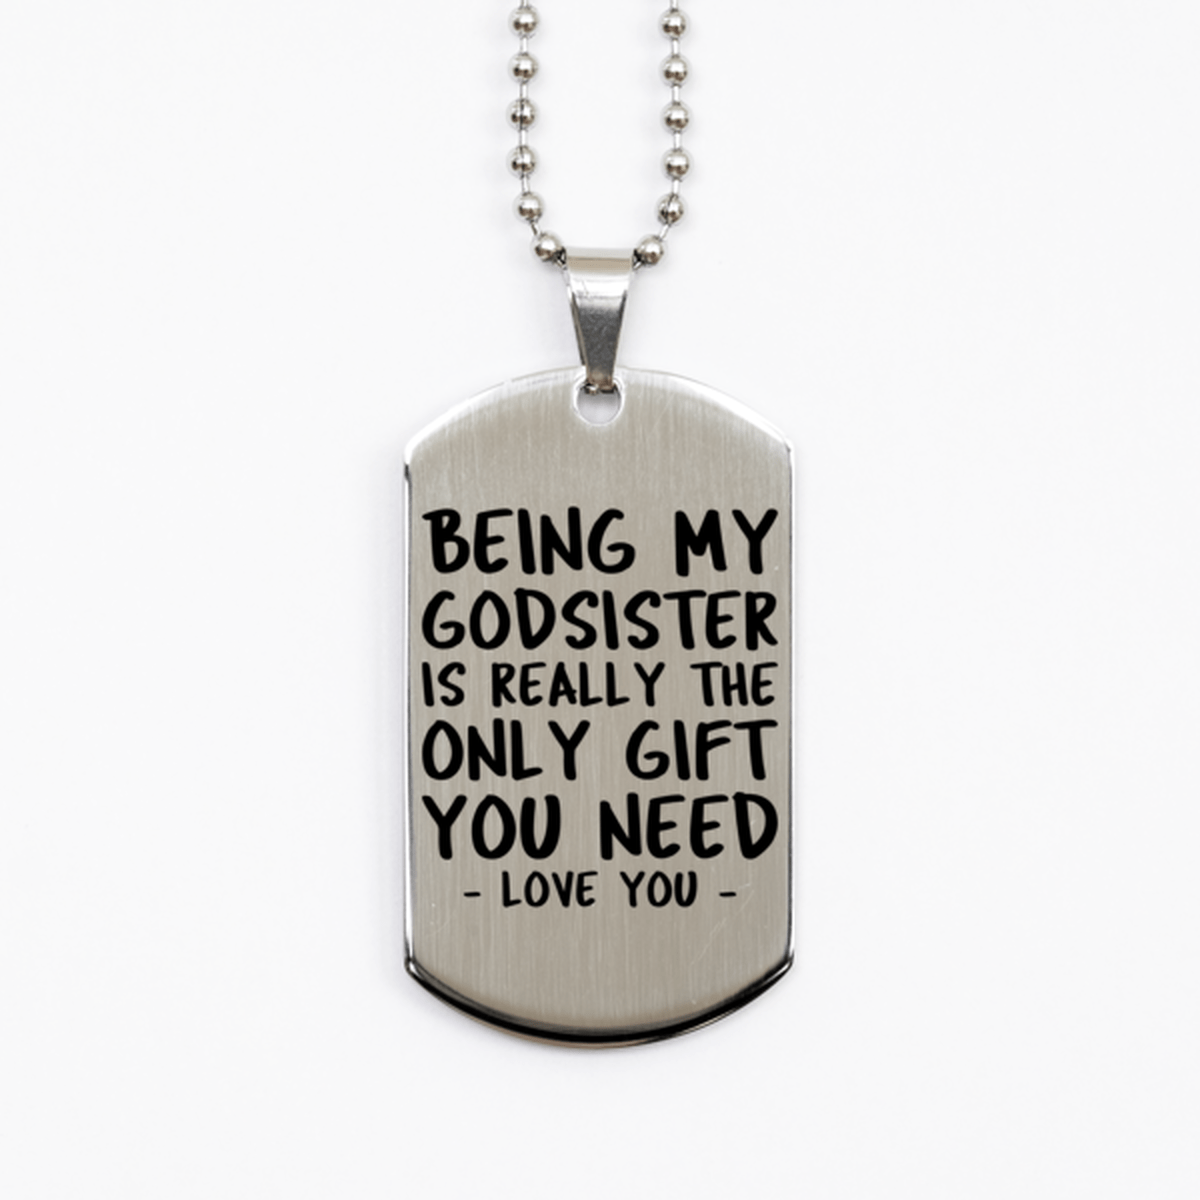 Funny Godsister Silver Dog Tag Necklace, Being My Godsister Is Really the Only Gift You Need, Best Birthday Gifts for Godsister